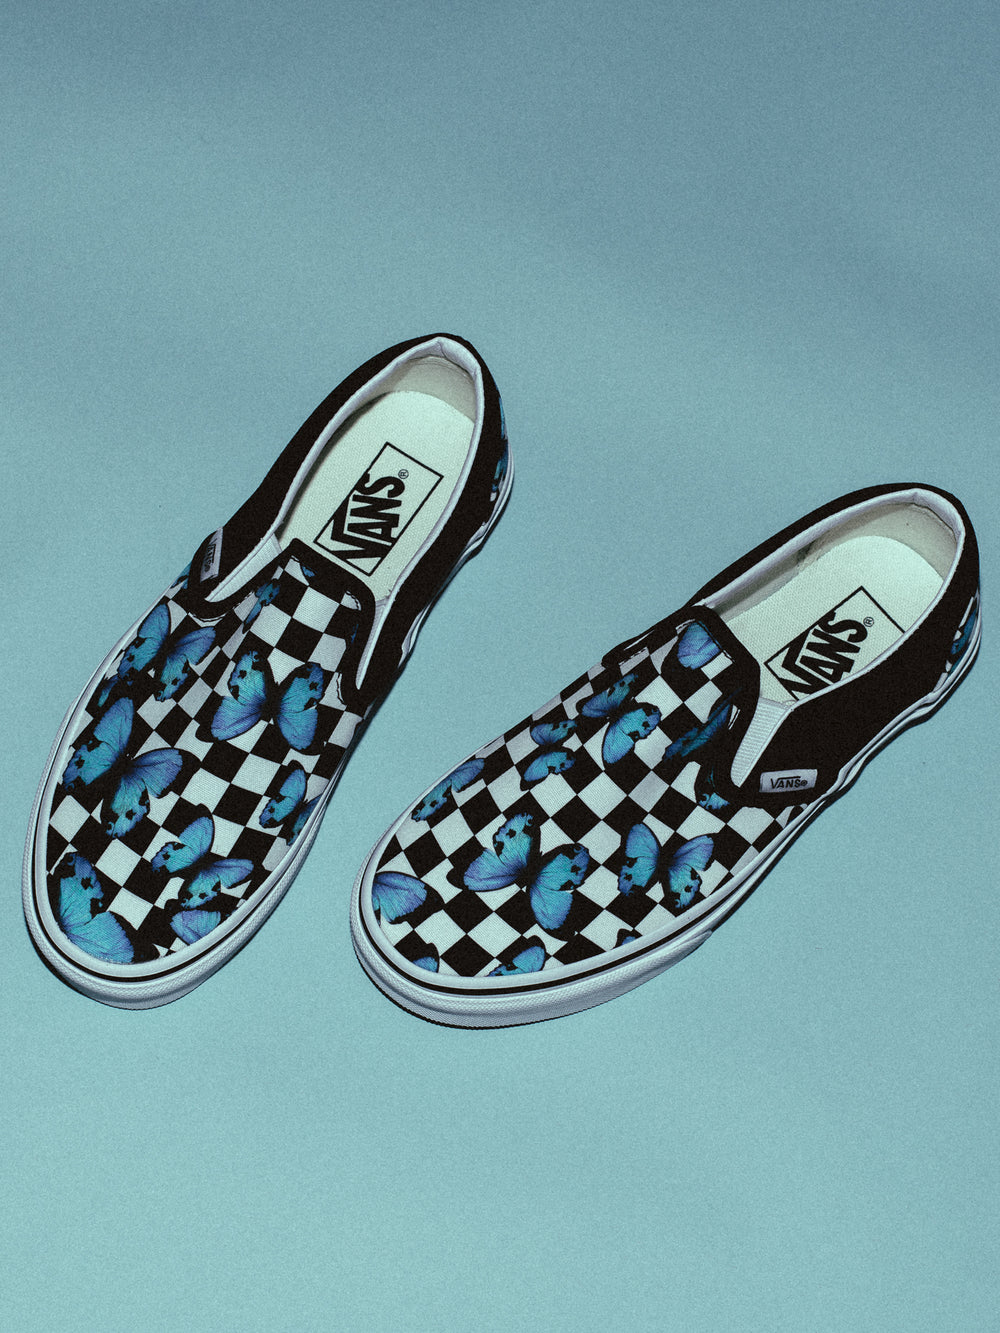 WOMENS VANS CL SLIP ON - BUTTERFLY CHECK - CLEARANCE